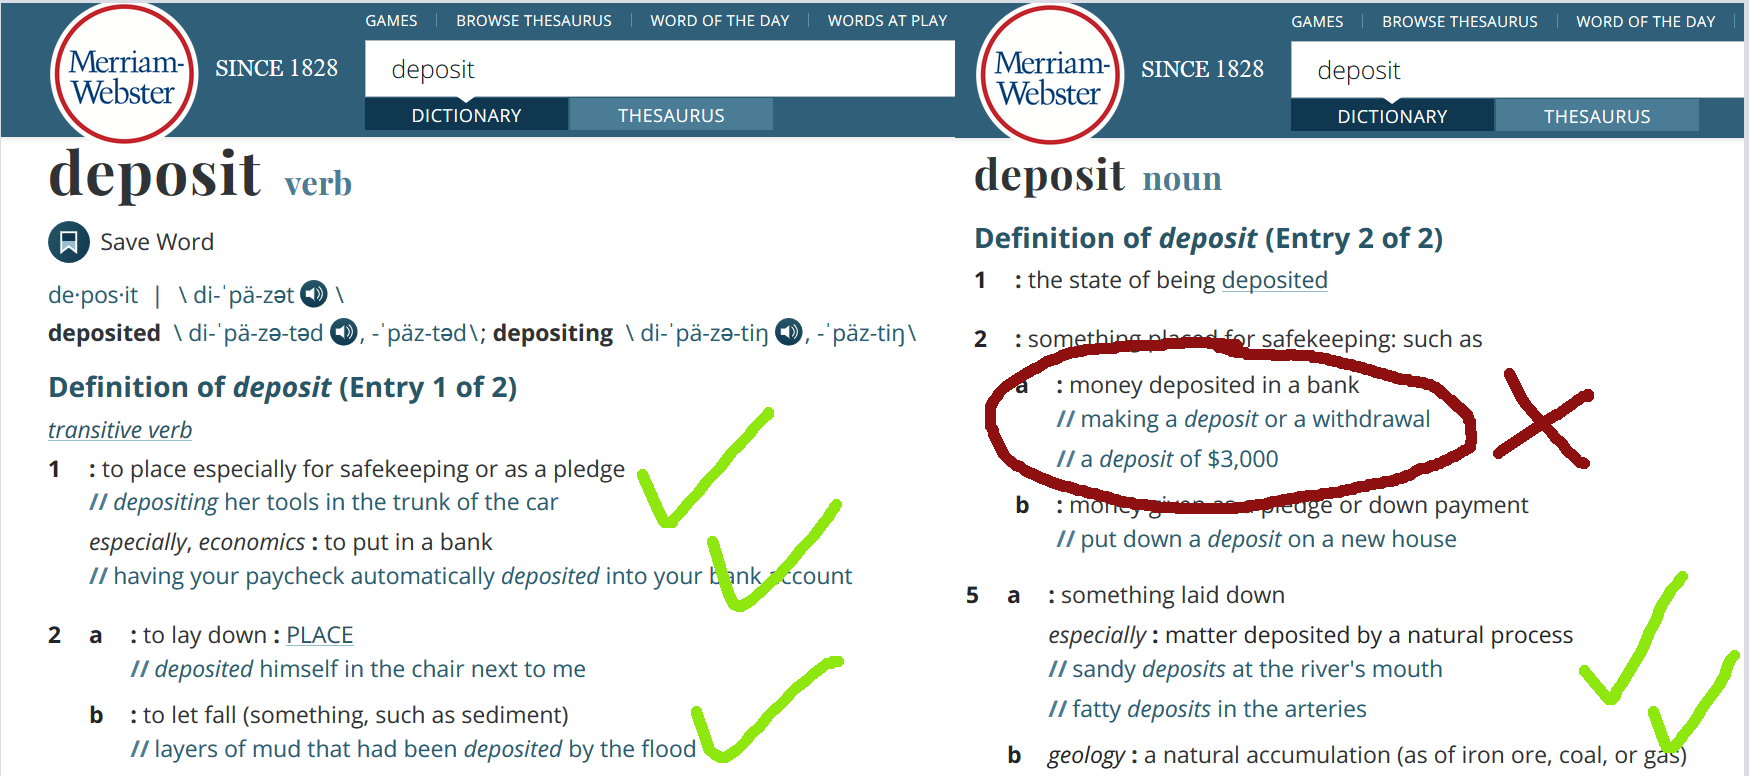 How a linguistic glitch tricks us into believing bank deposits are deposited in banks